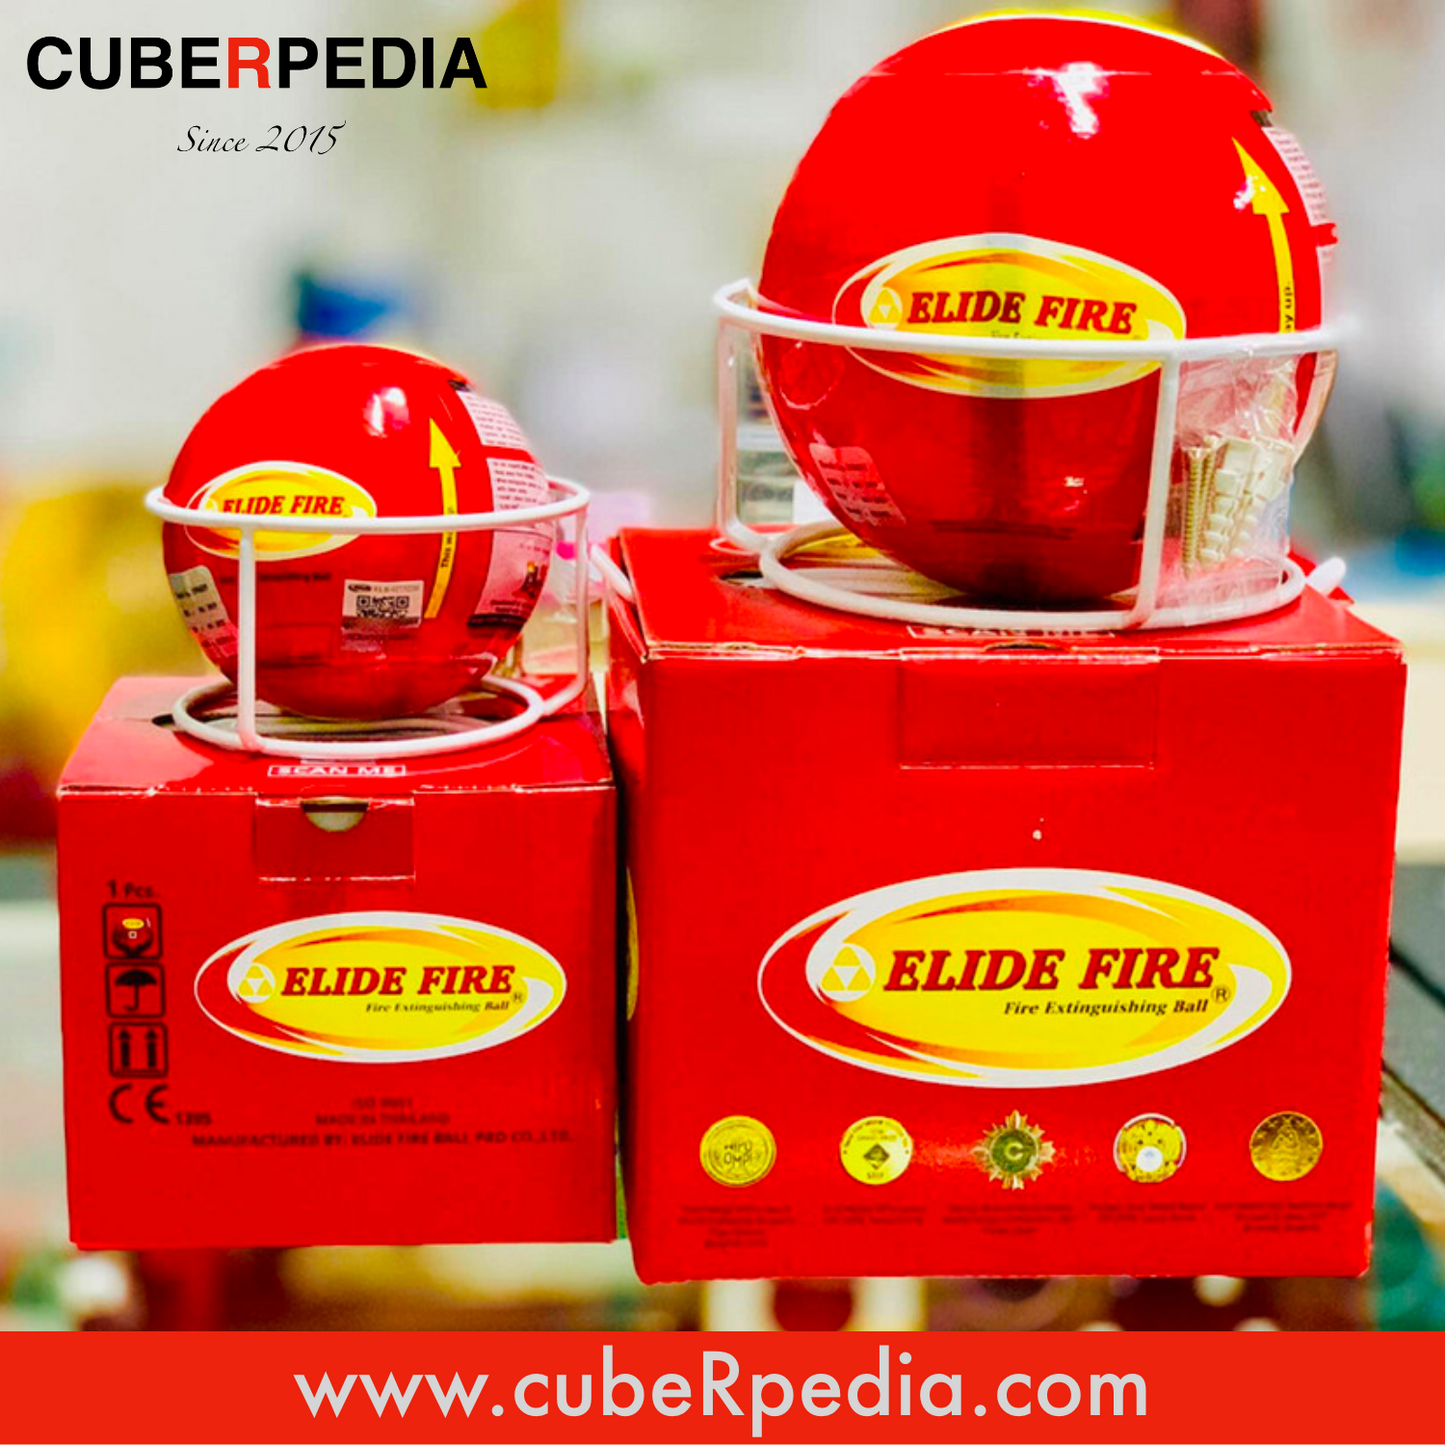 [Clearance] Elide Fire Extinguisher Ball Big